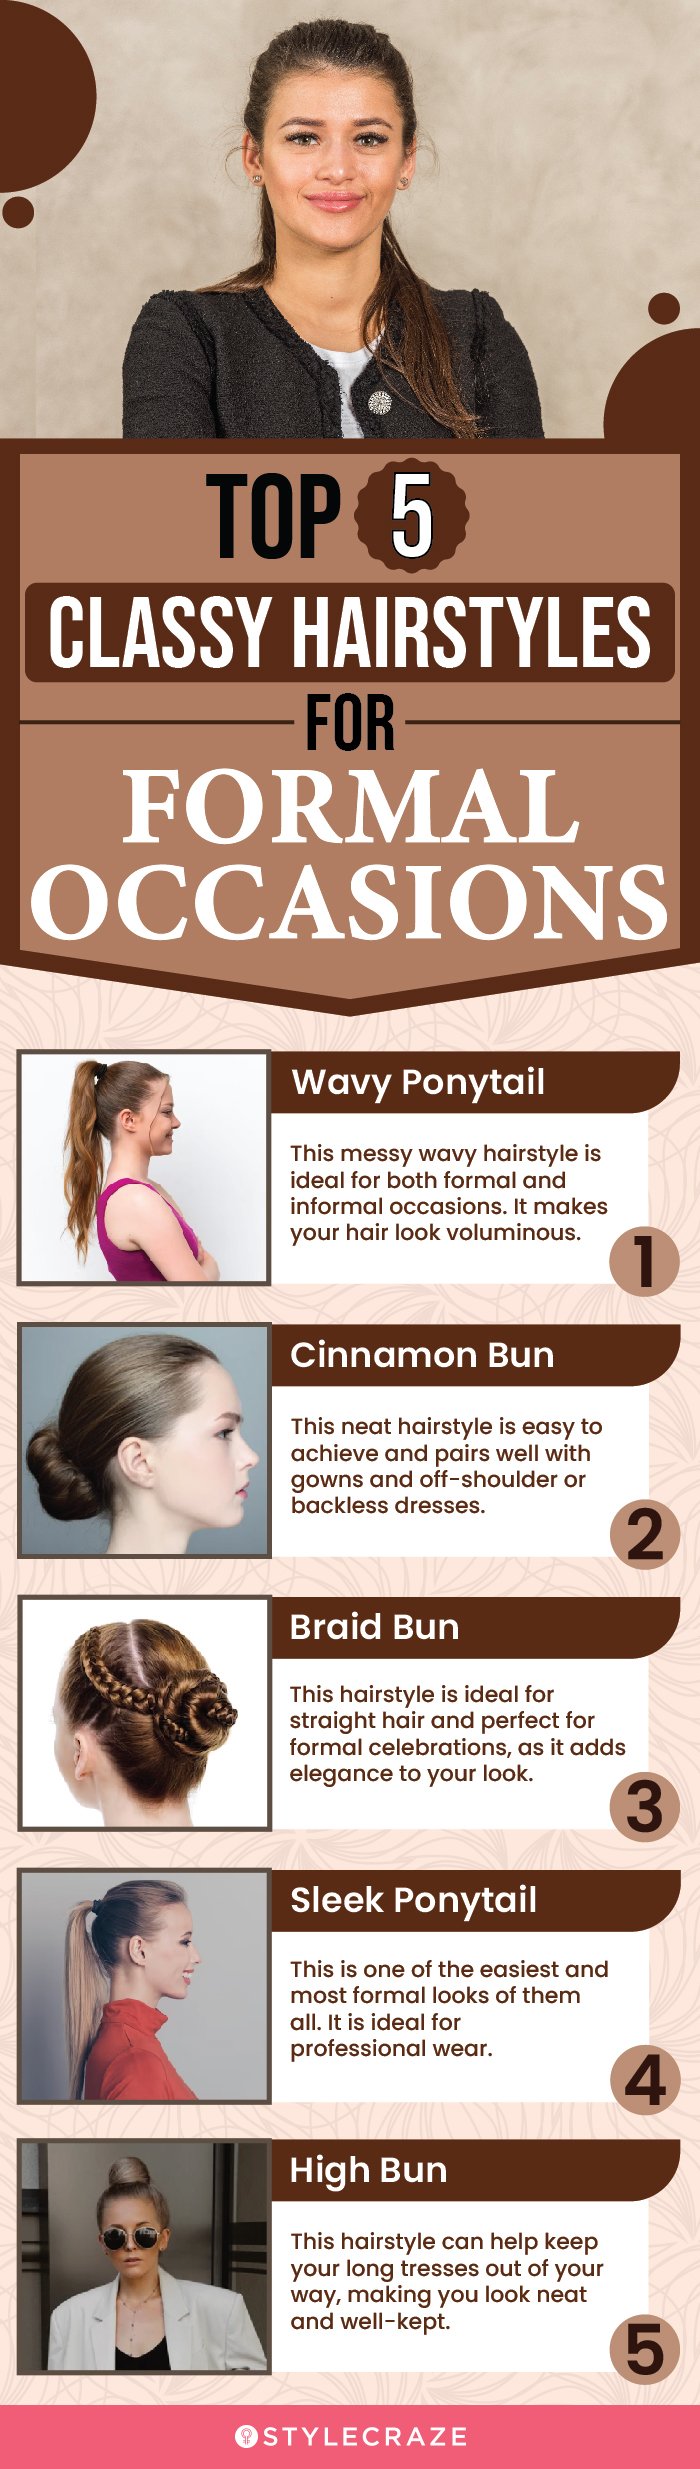 top 5 classy hairstyles for formal occasions (infographic)